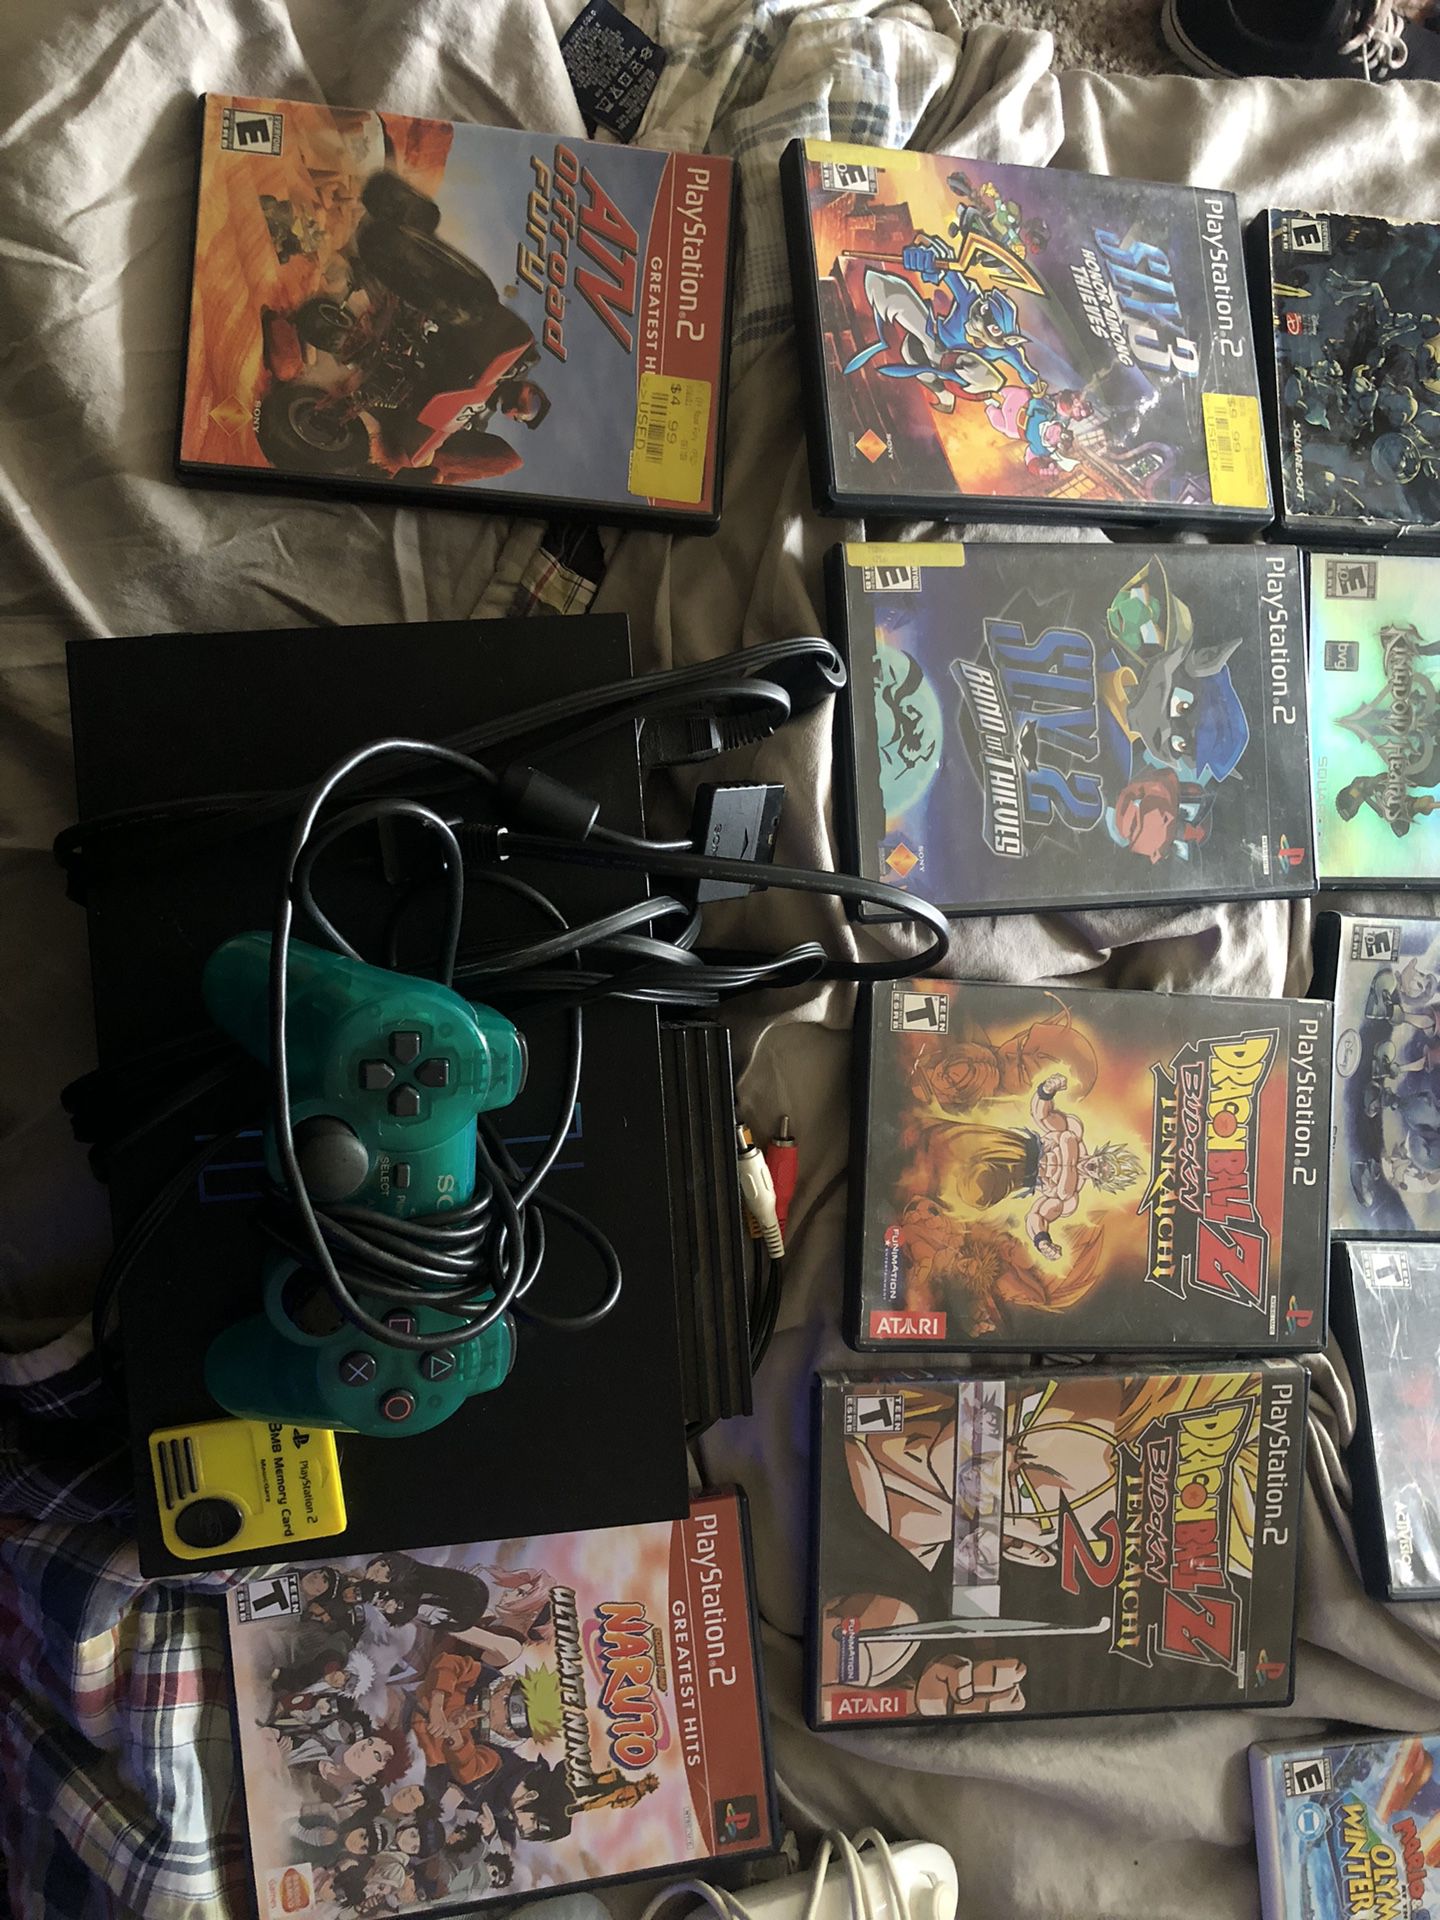 PS2 And Wii Consoles With Games And Accessories